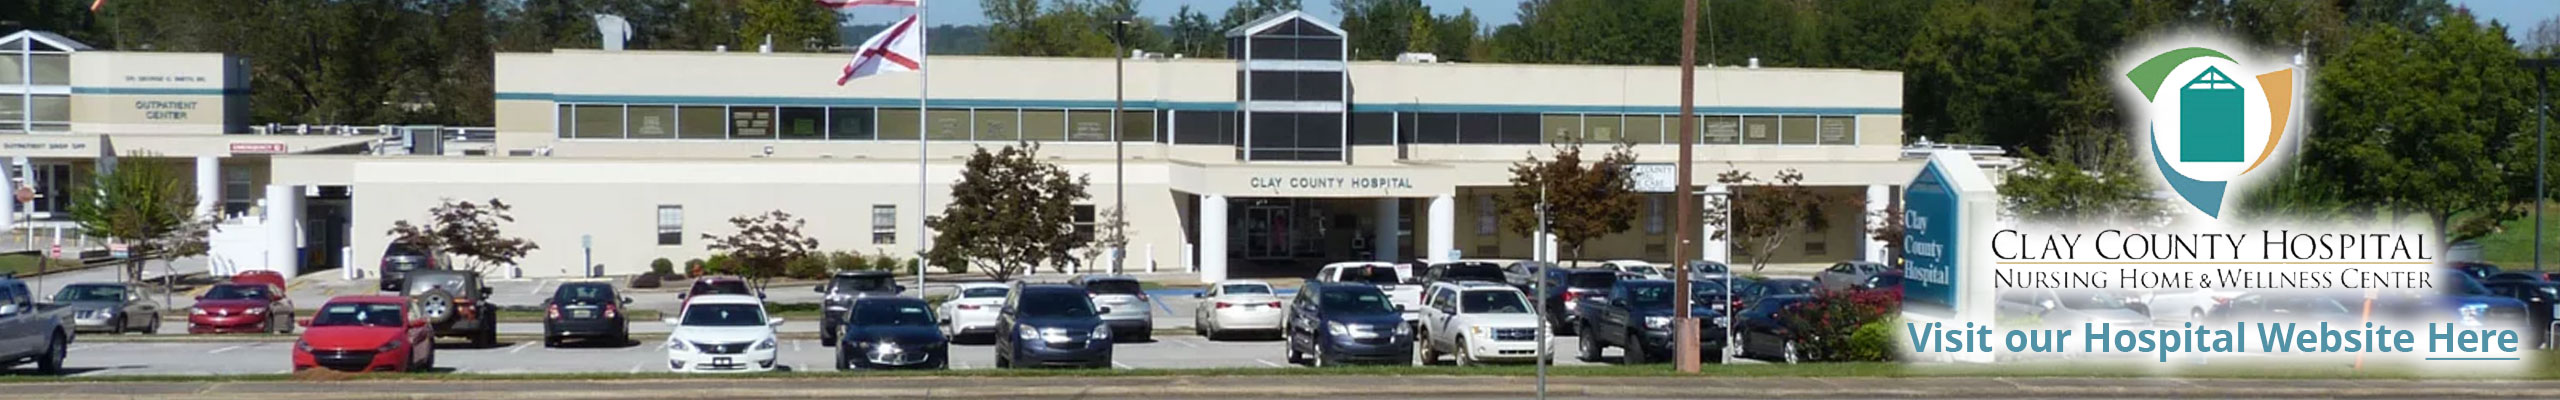 Pictured is an outside photo of the Clay County Hospital. 

Visit the Hospital Website by clicking here.